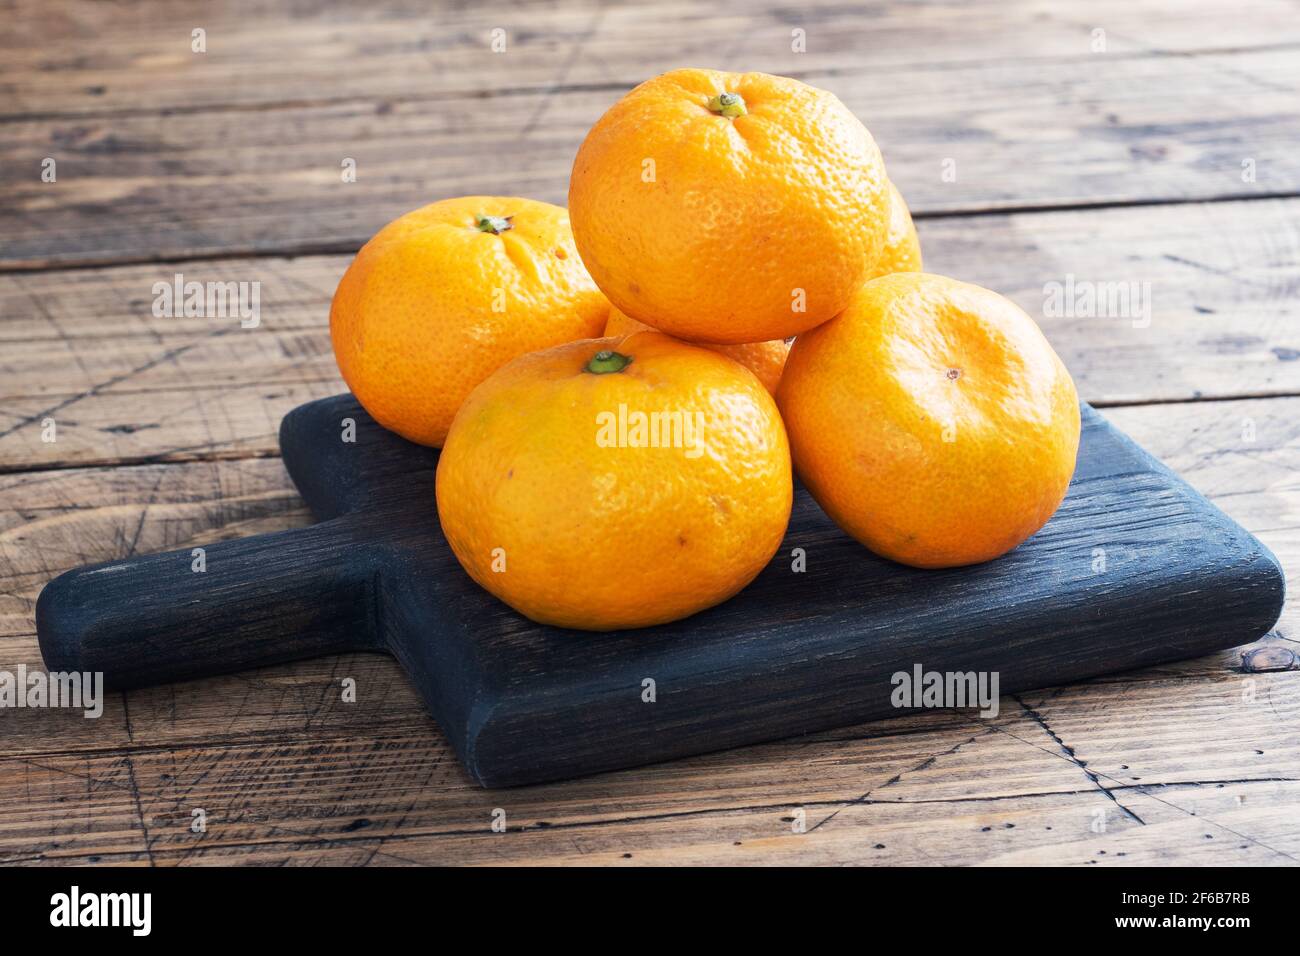 Oranges tangerines or mandarins clementines, citrus fruits on rustic wooden background, copy space Stock Photo